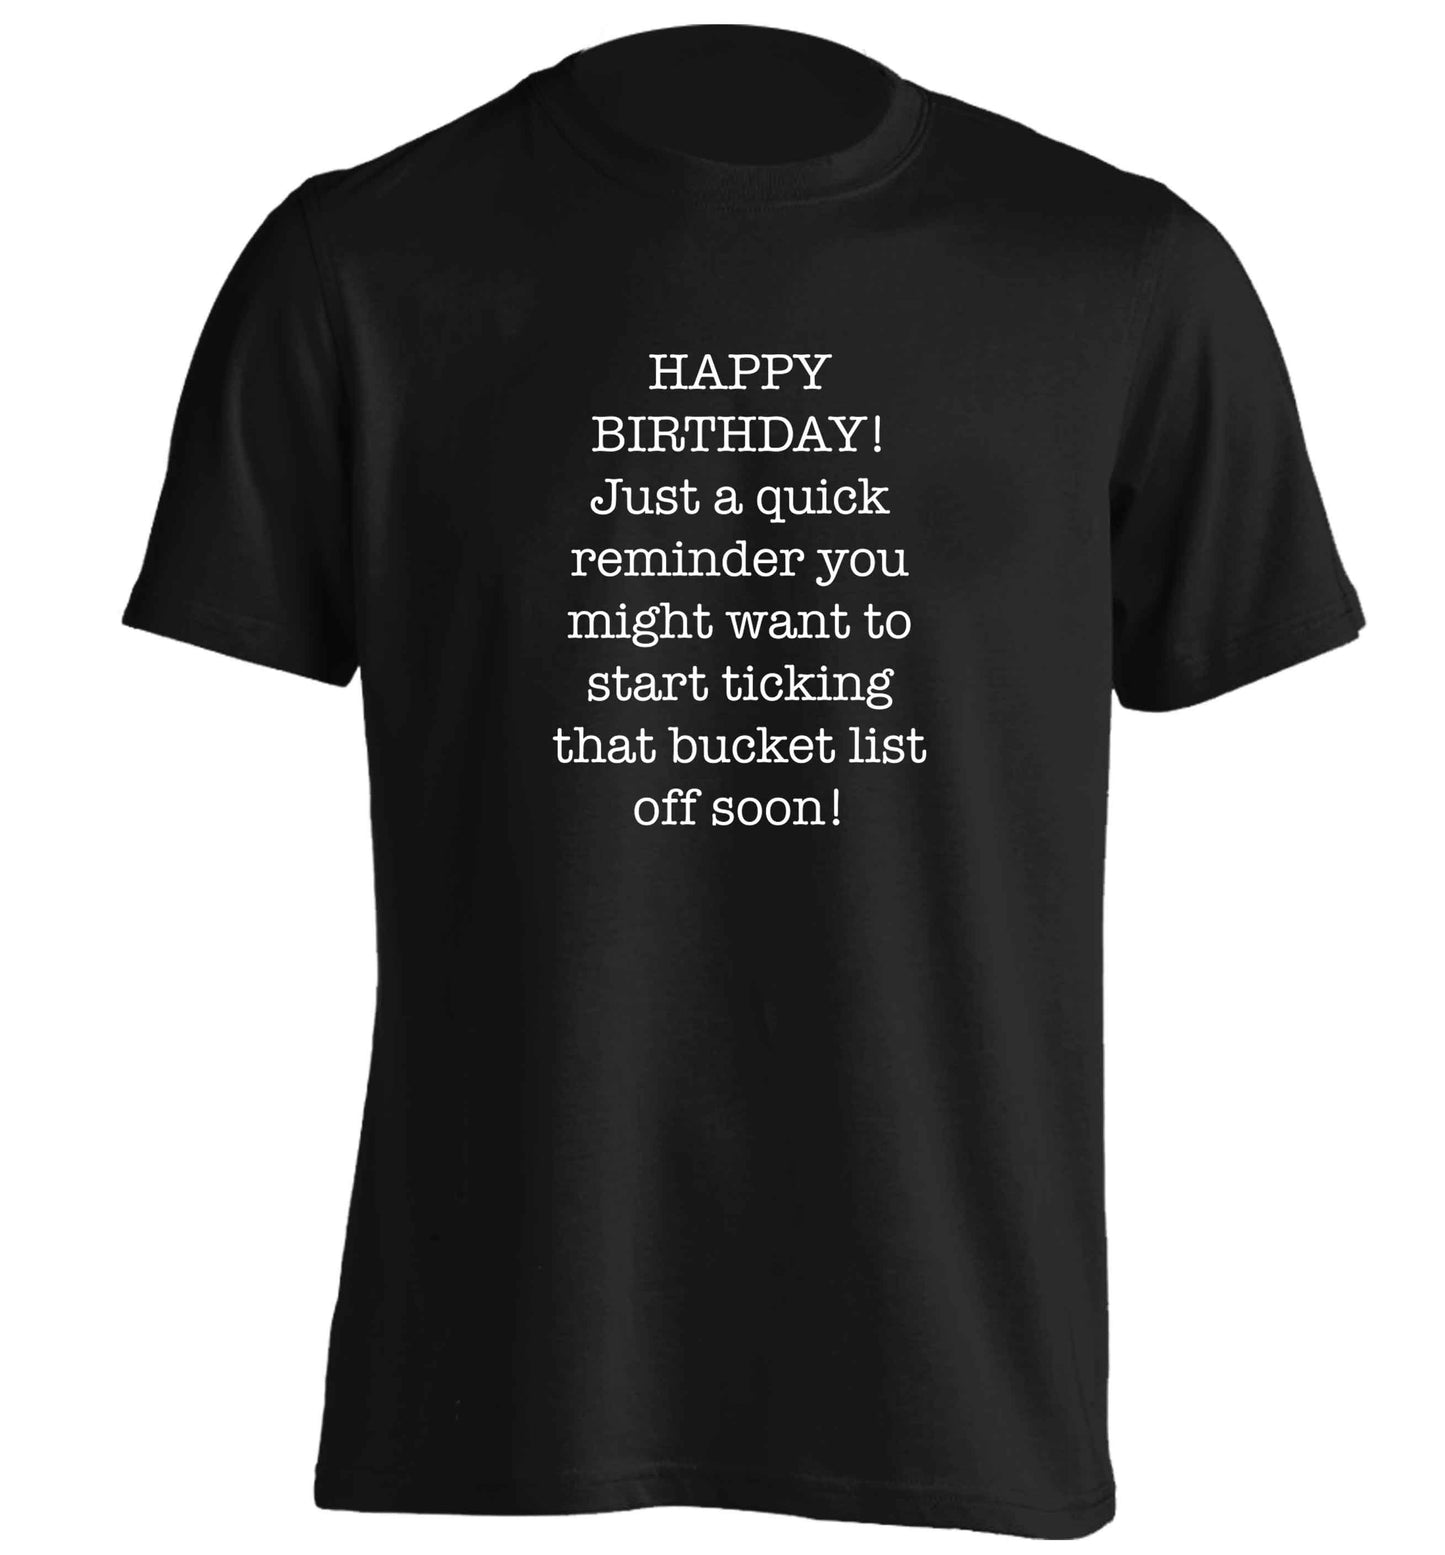 Happy birthday, just a quick reminder you might want to start ticking that bucket list off soon adults unisex black Tshirt 2XL